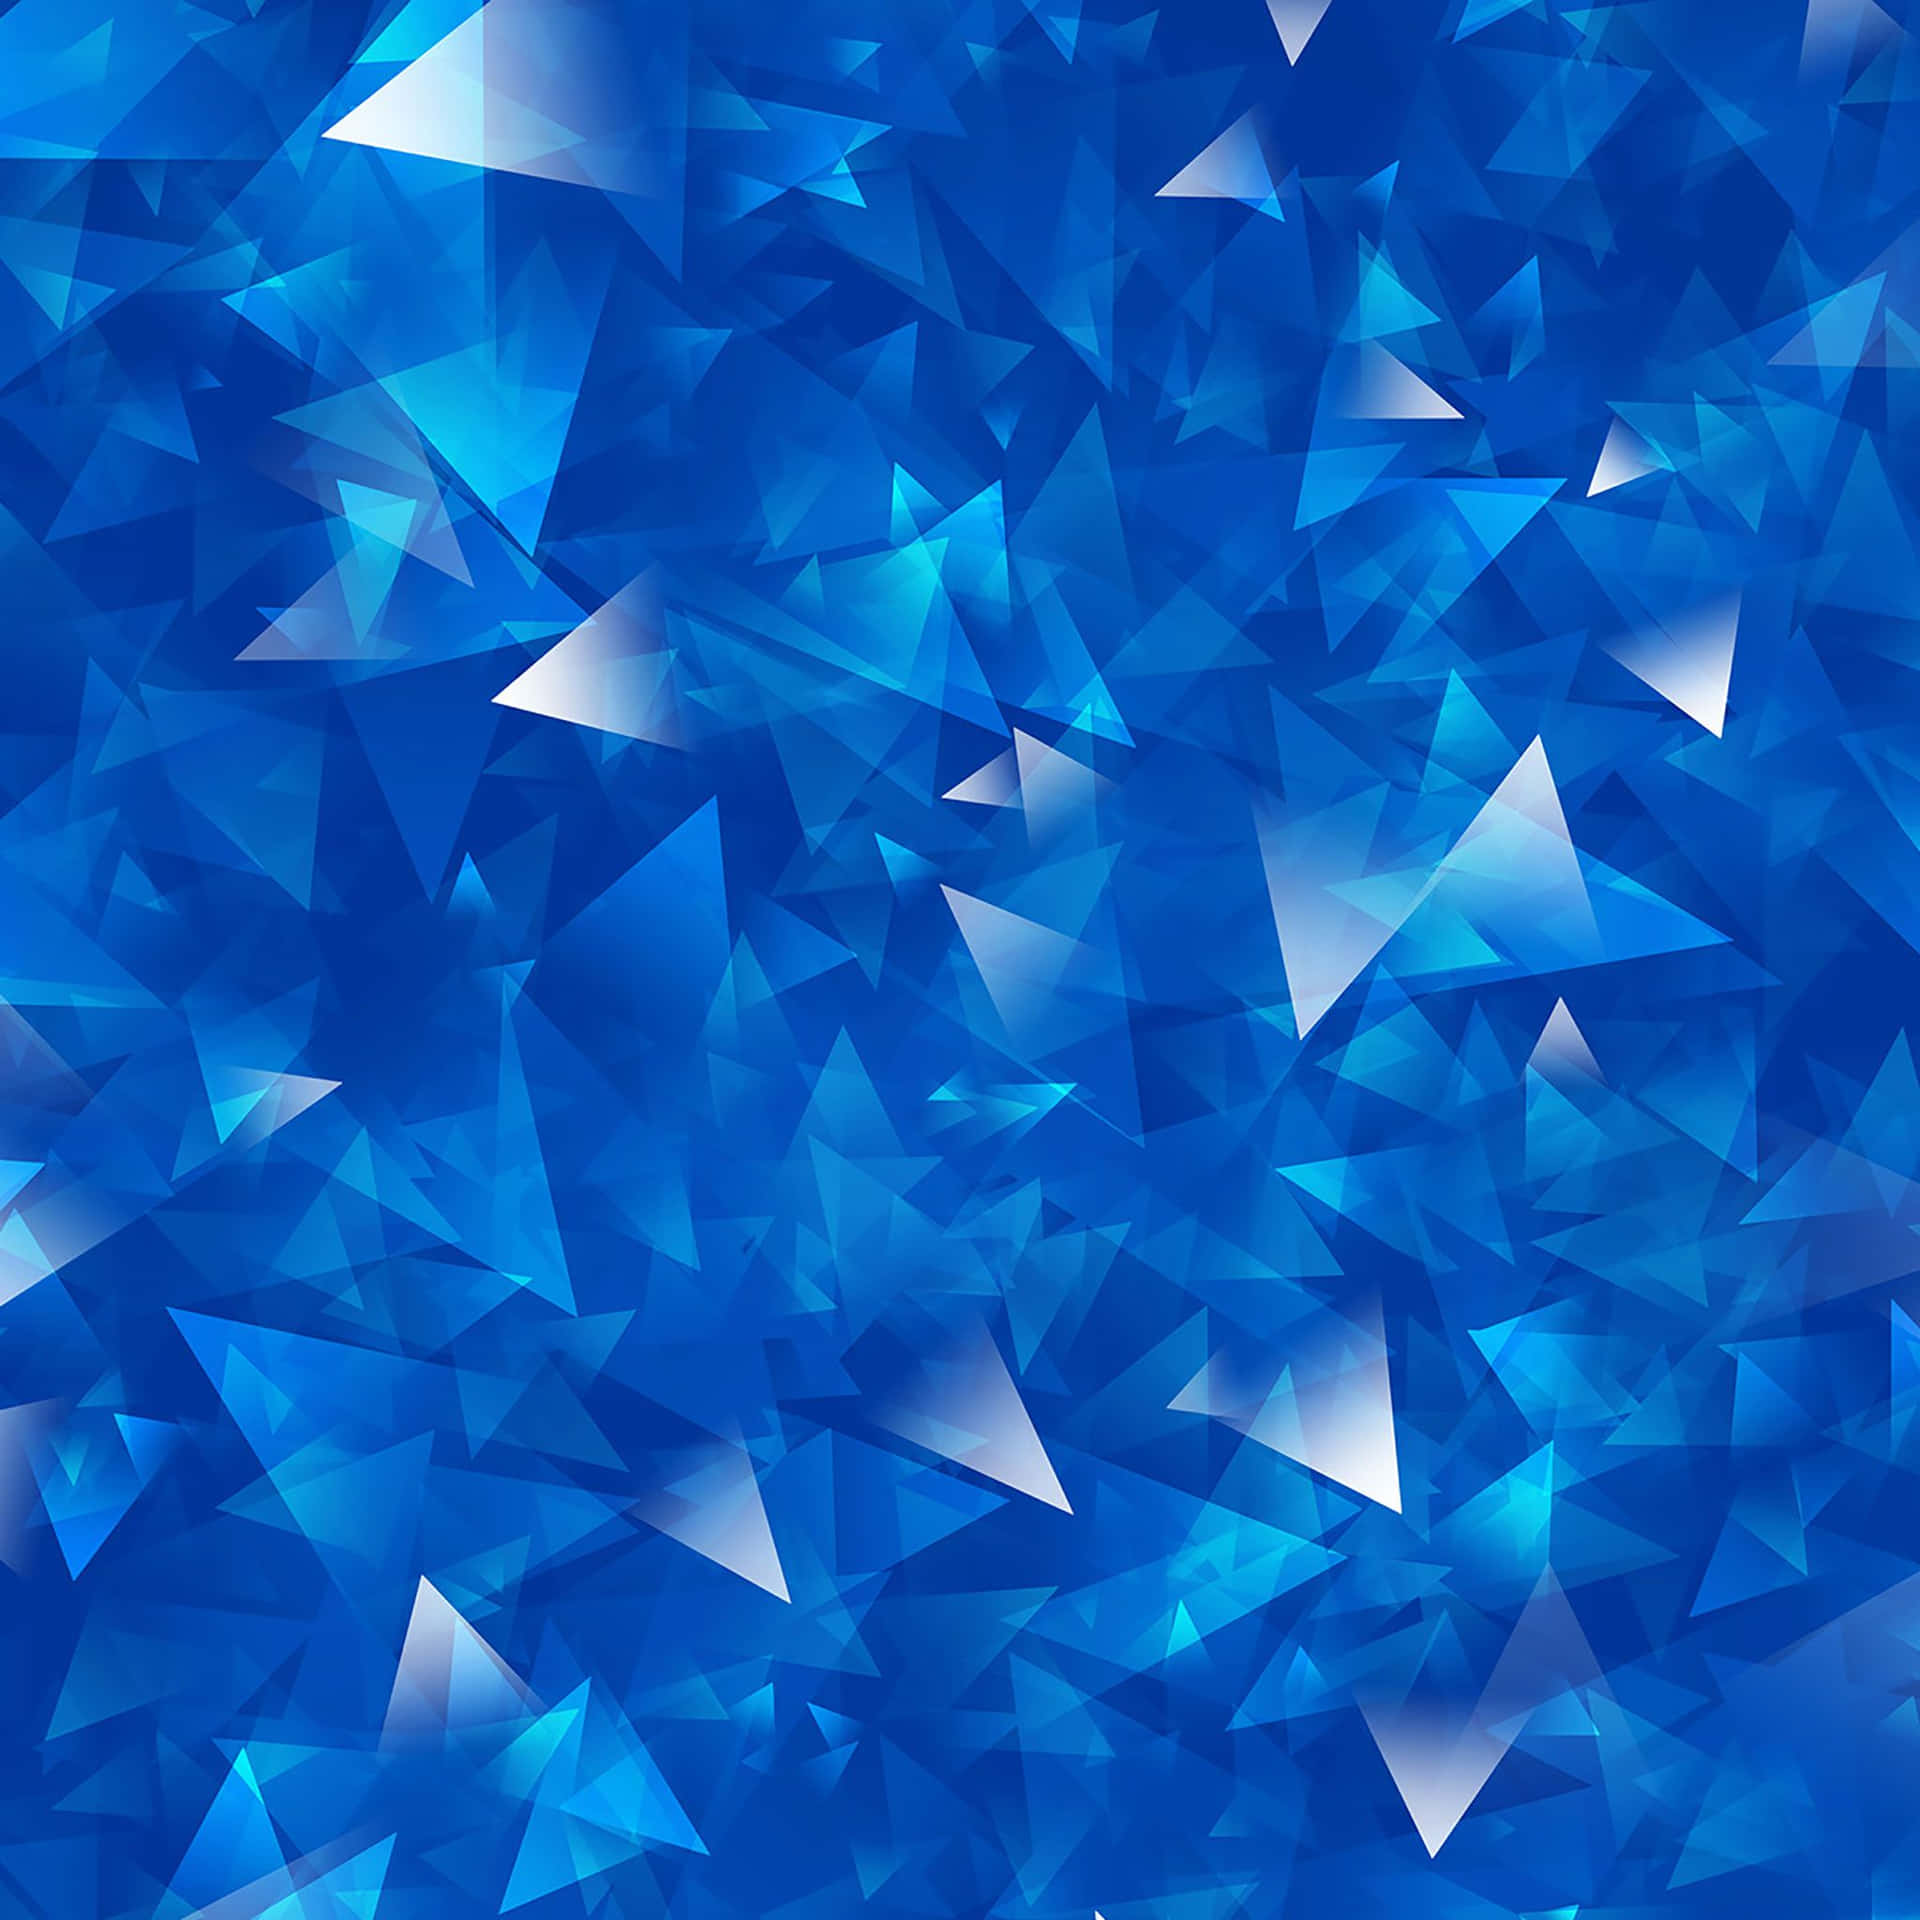 Blue Triangles For Ipad Wallpaper